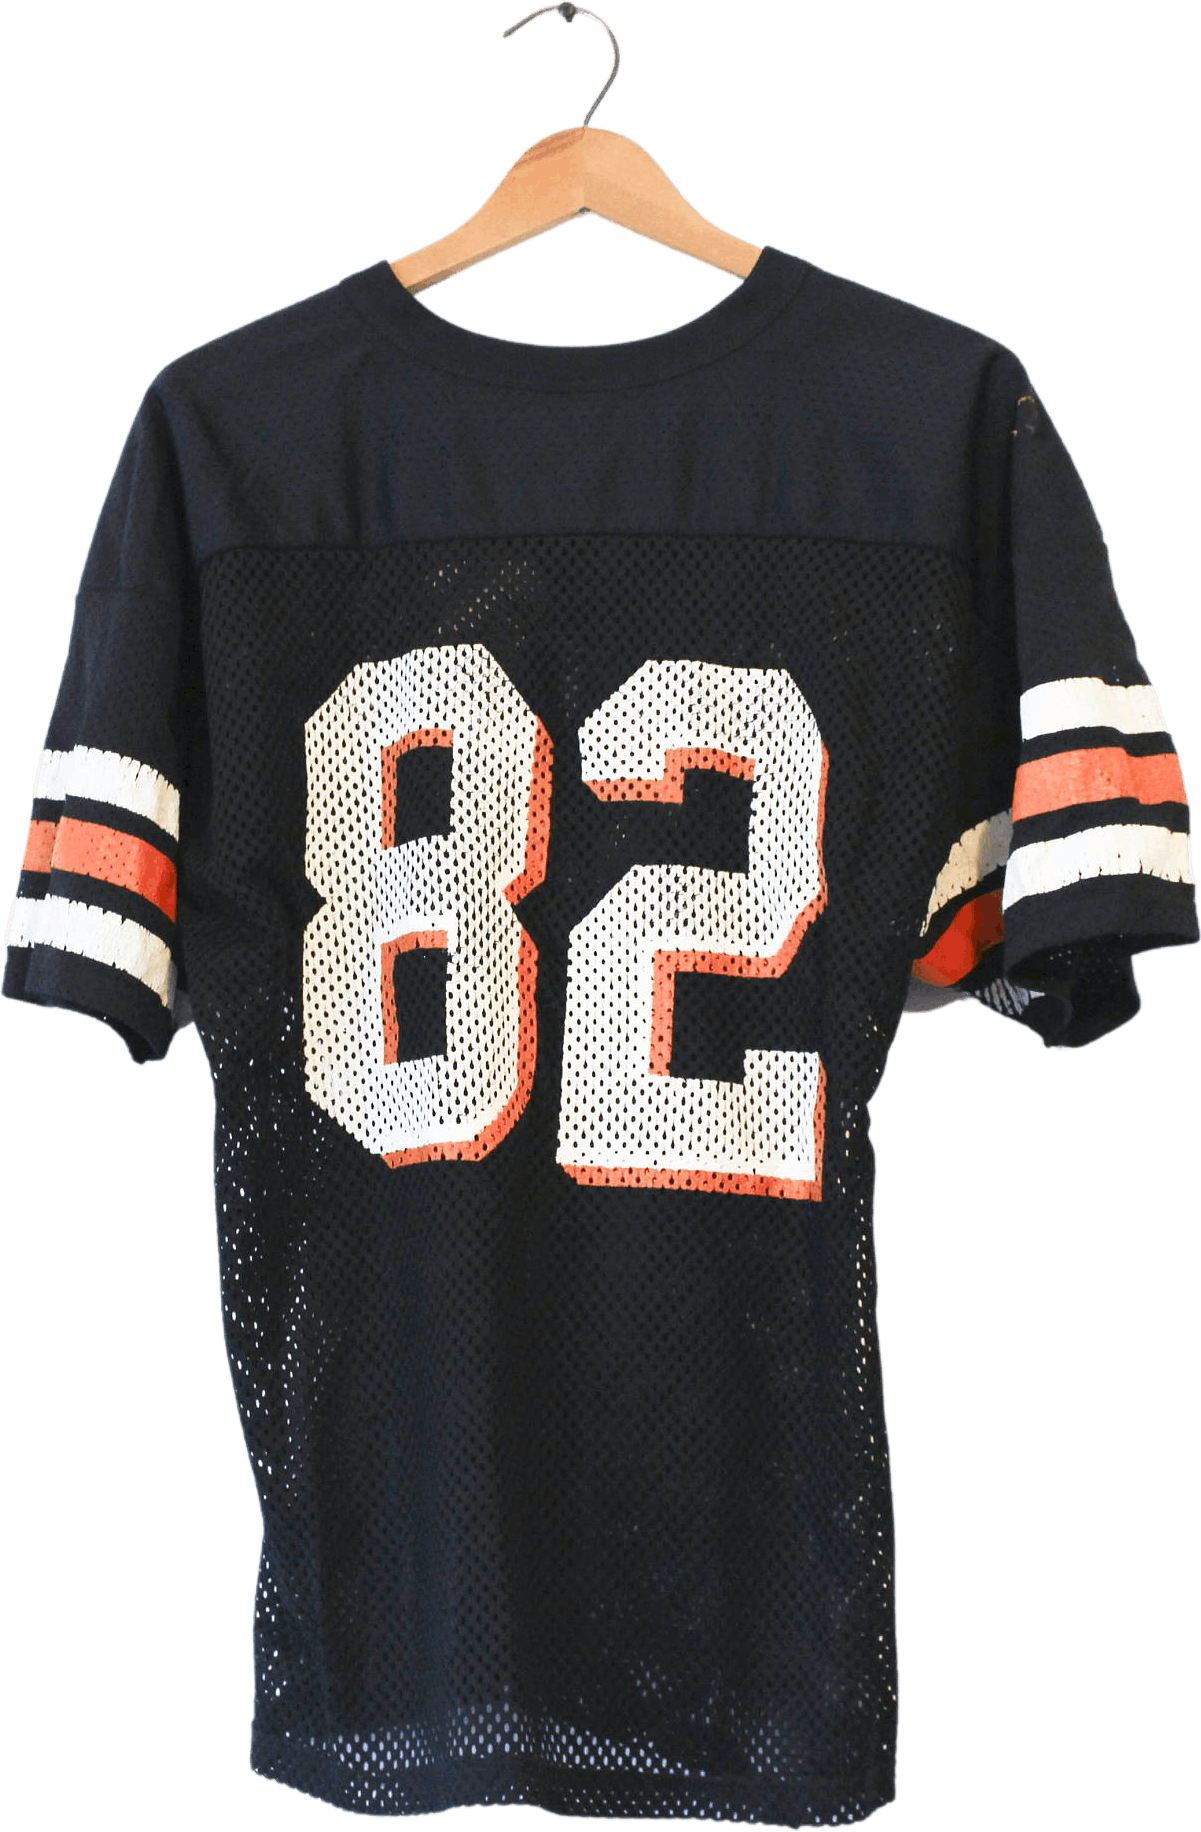 Vintage Black Football T-Shirt Jersey by Russell | Shop THRILLING